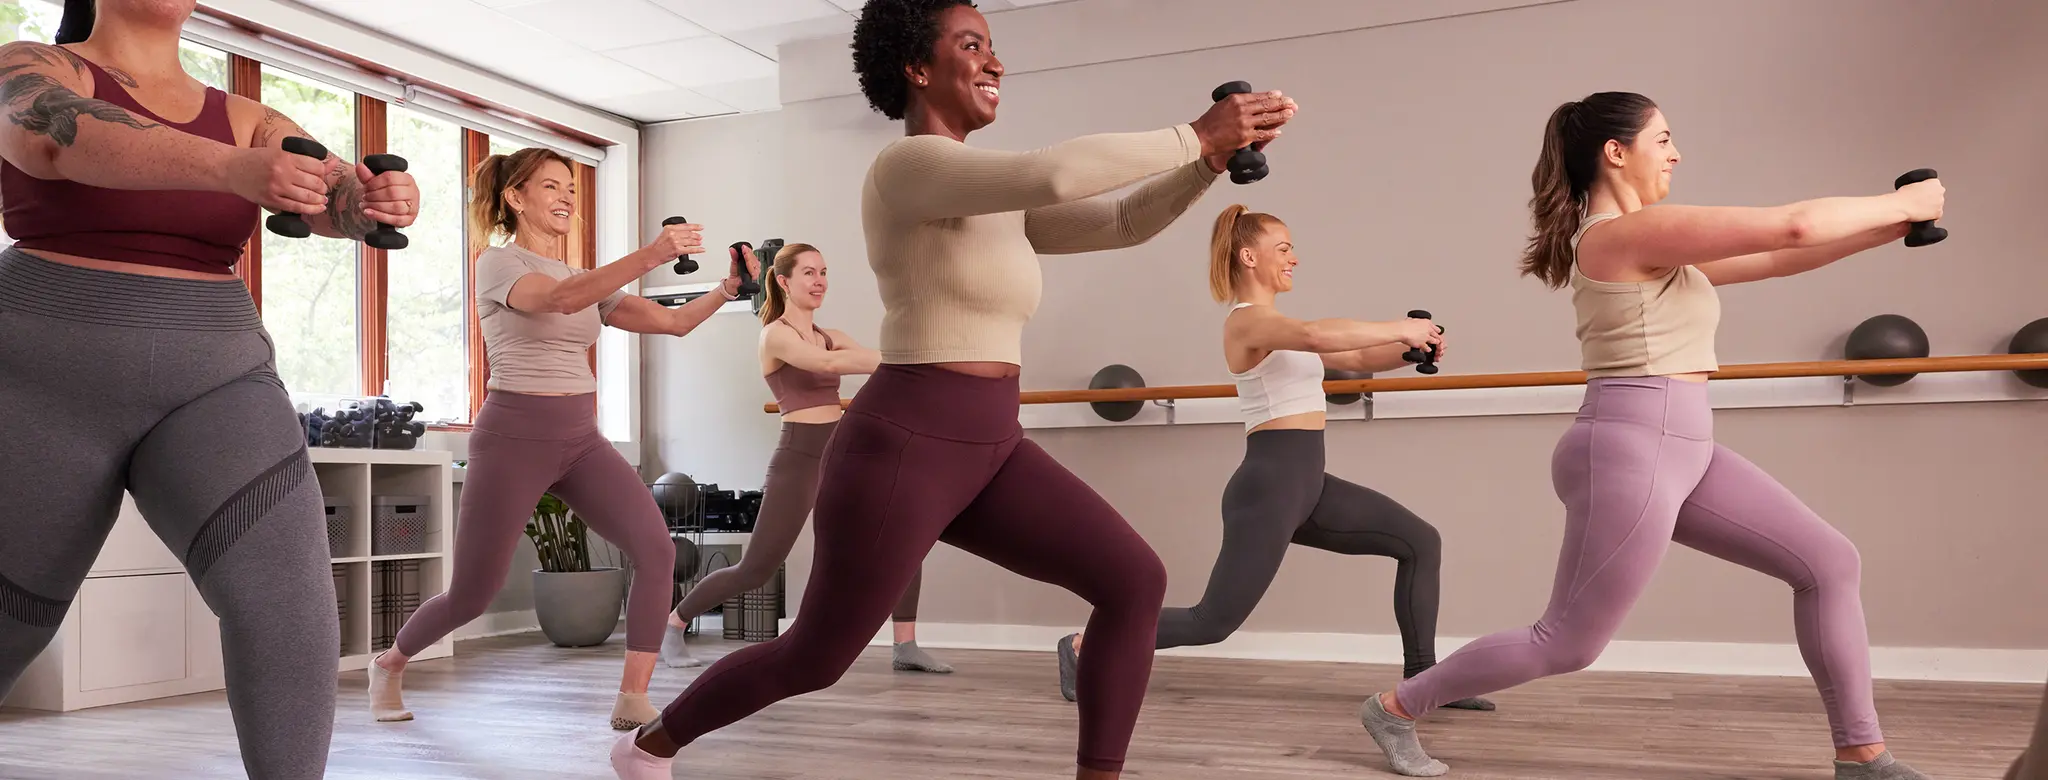 full barre class doing exercises with weights